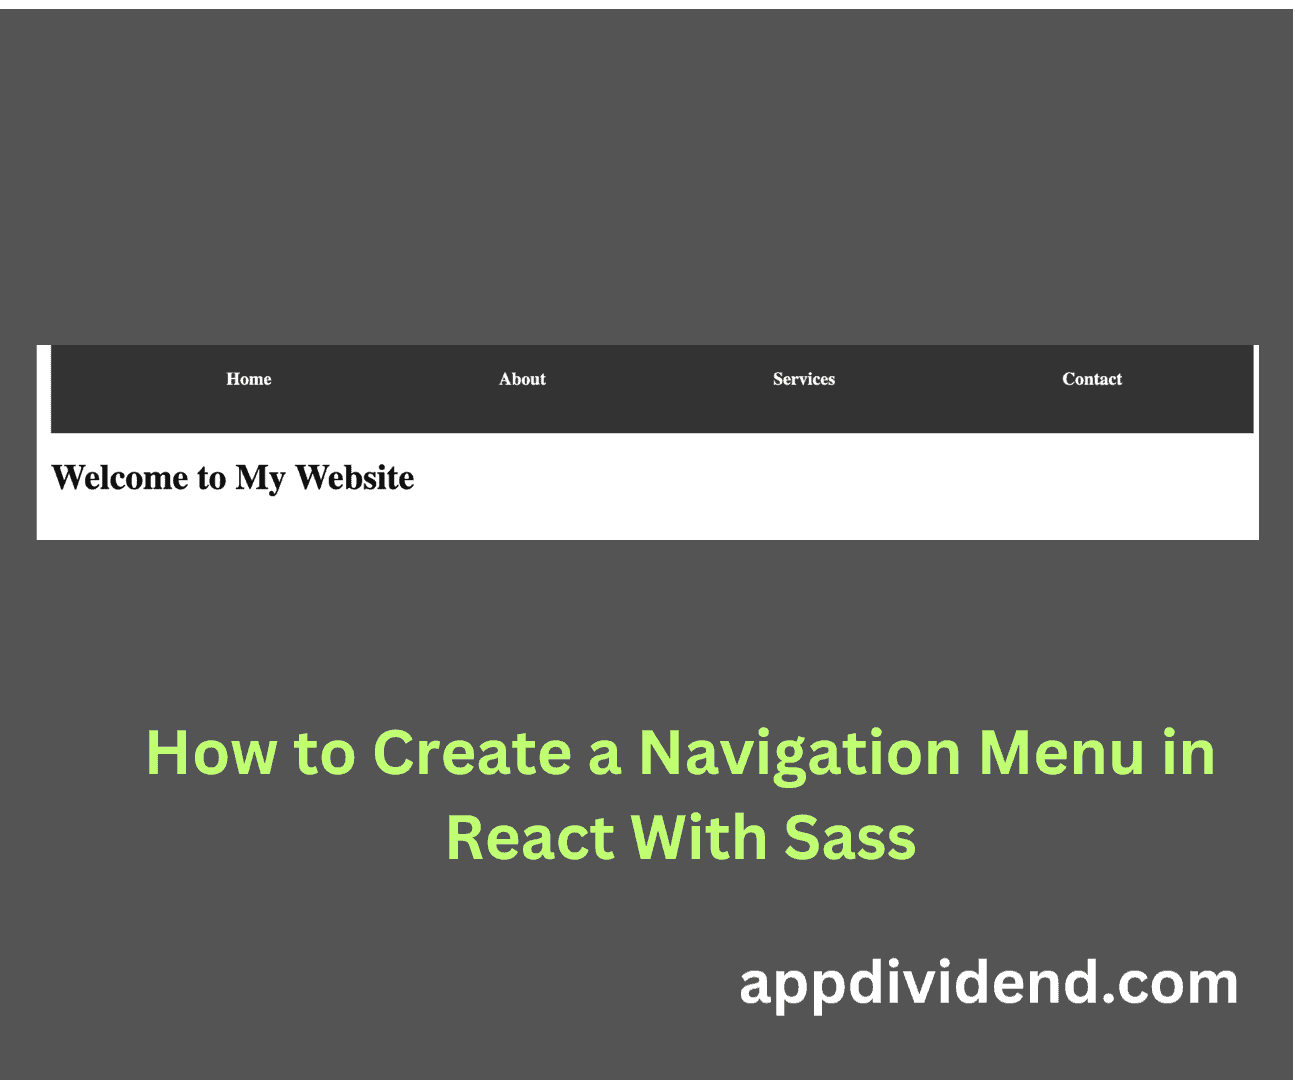 How to Create a Navigation Menu in React With Sass